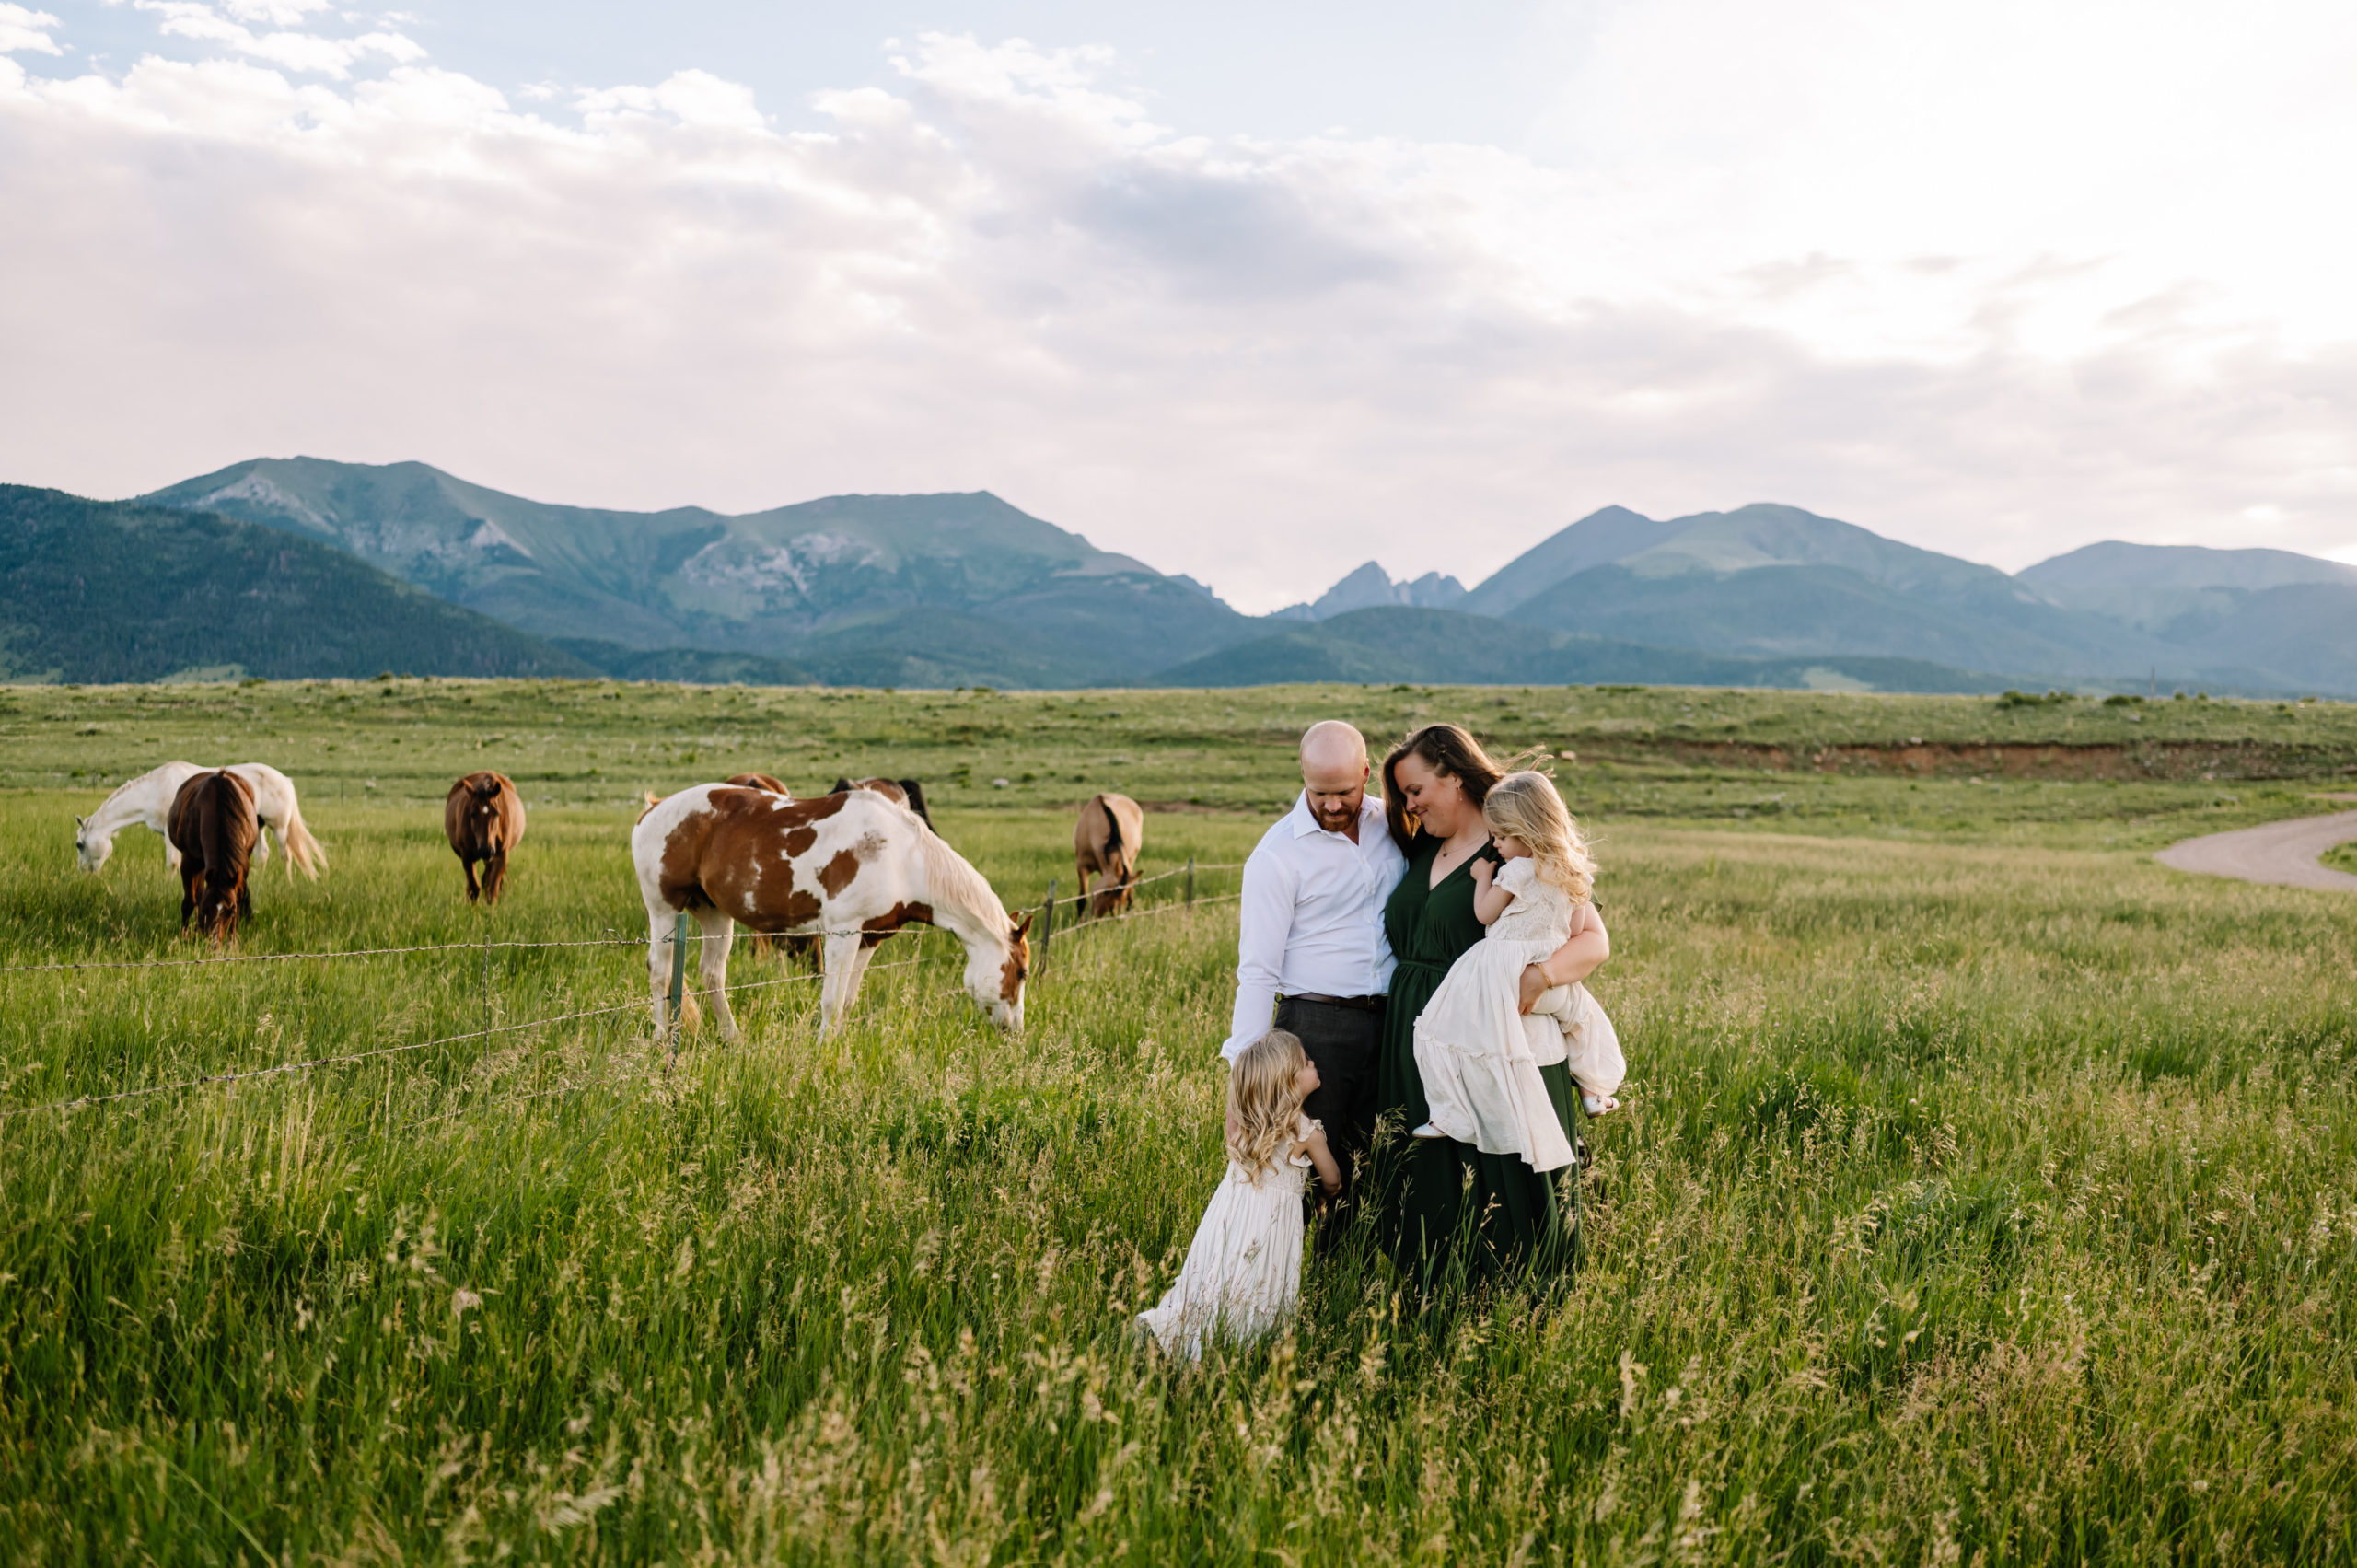 A mom, dad, and two twin girls hugging in a field of horses in front of the mountains.